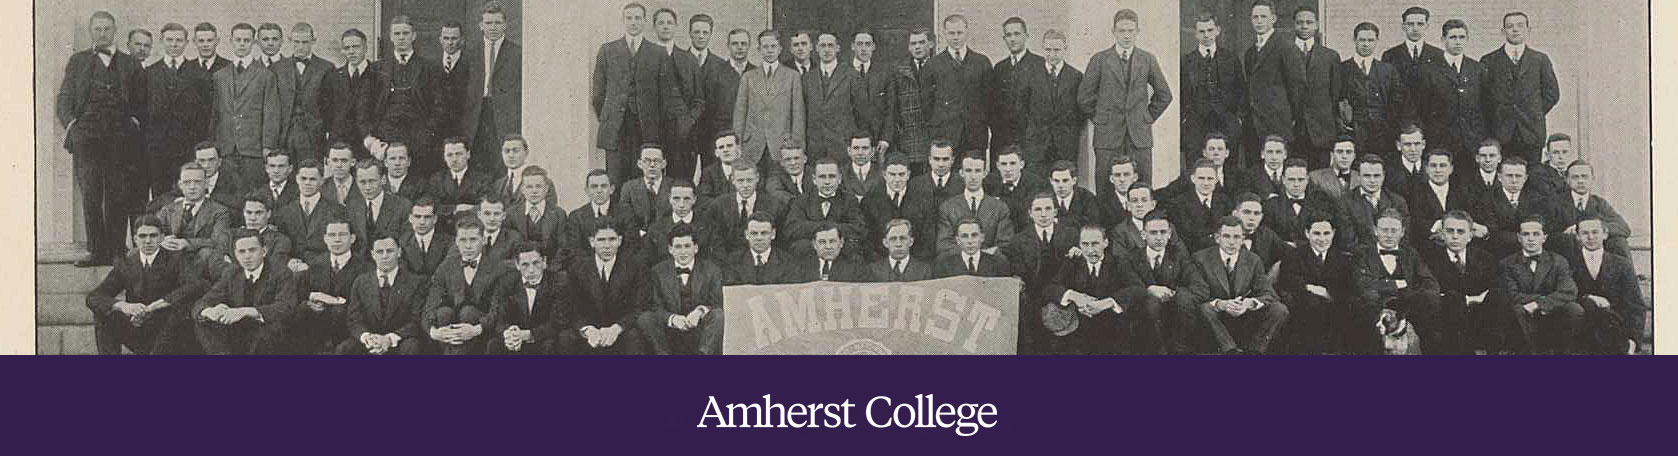 black and white image of the amherst class of 1815